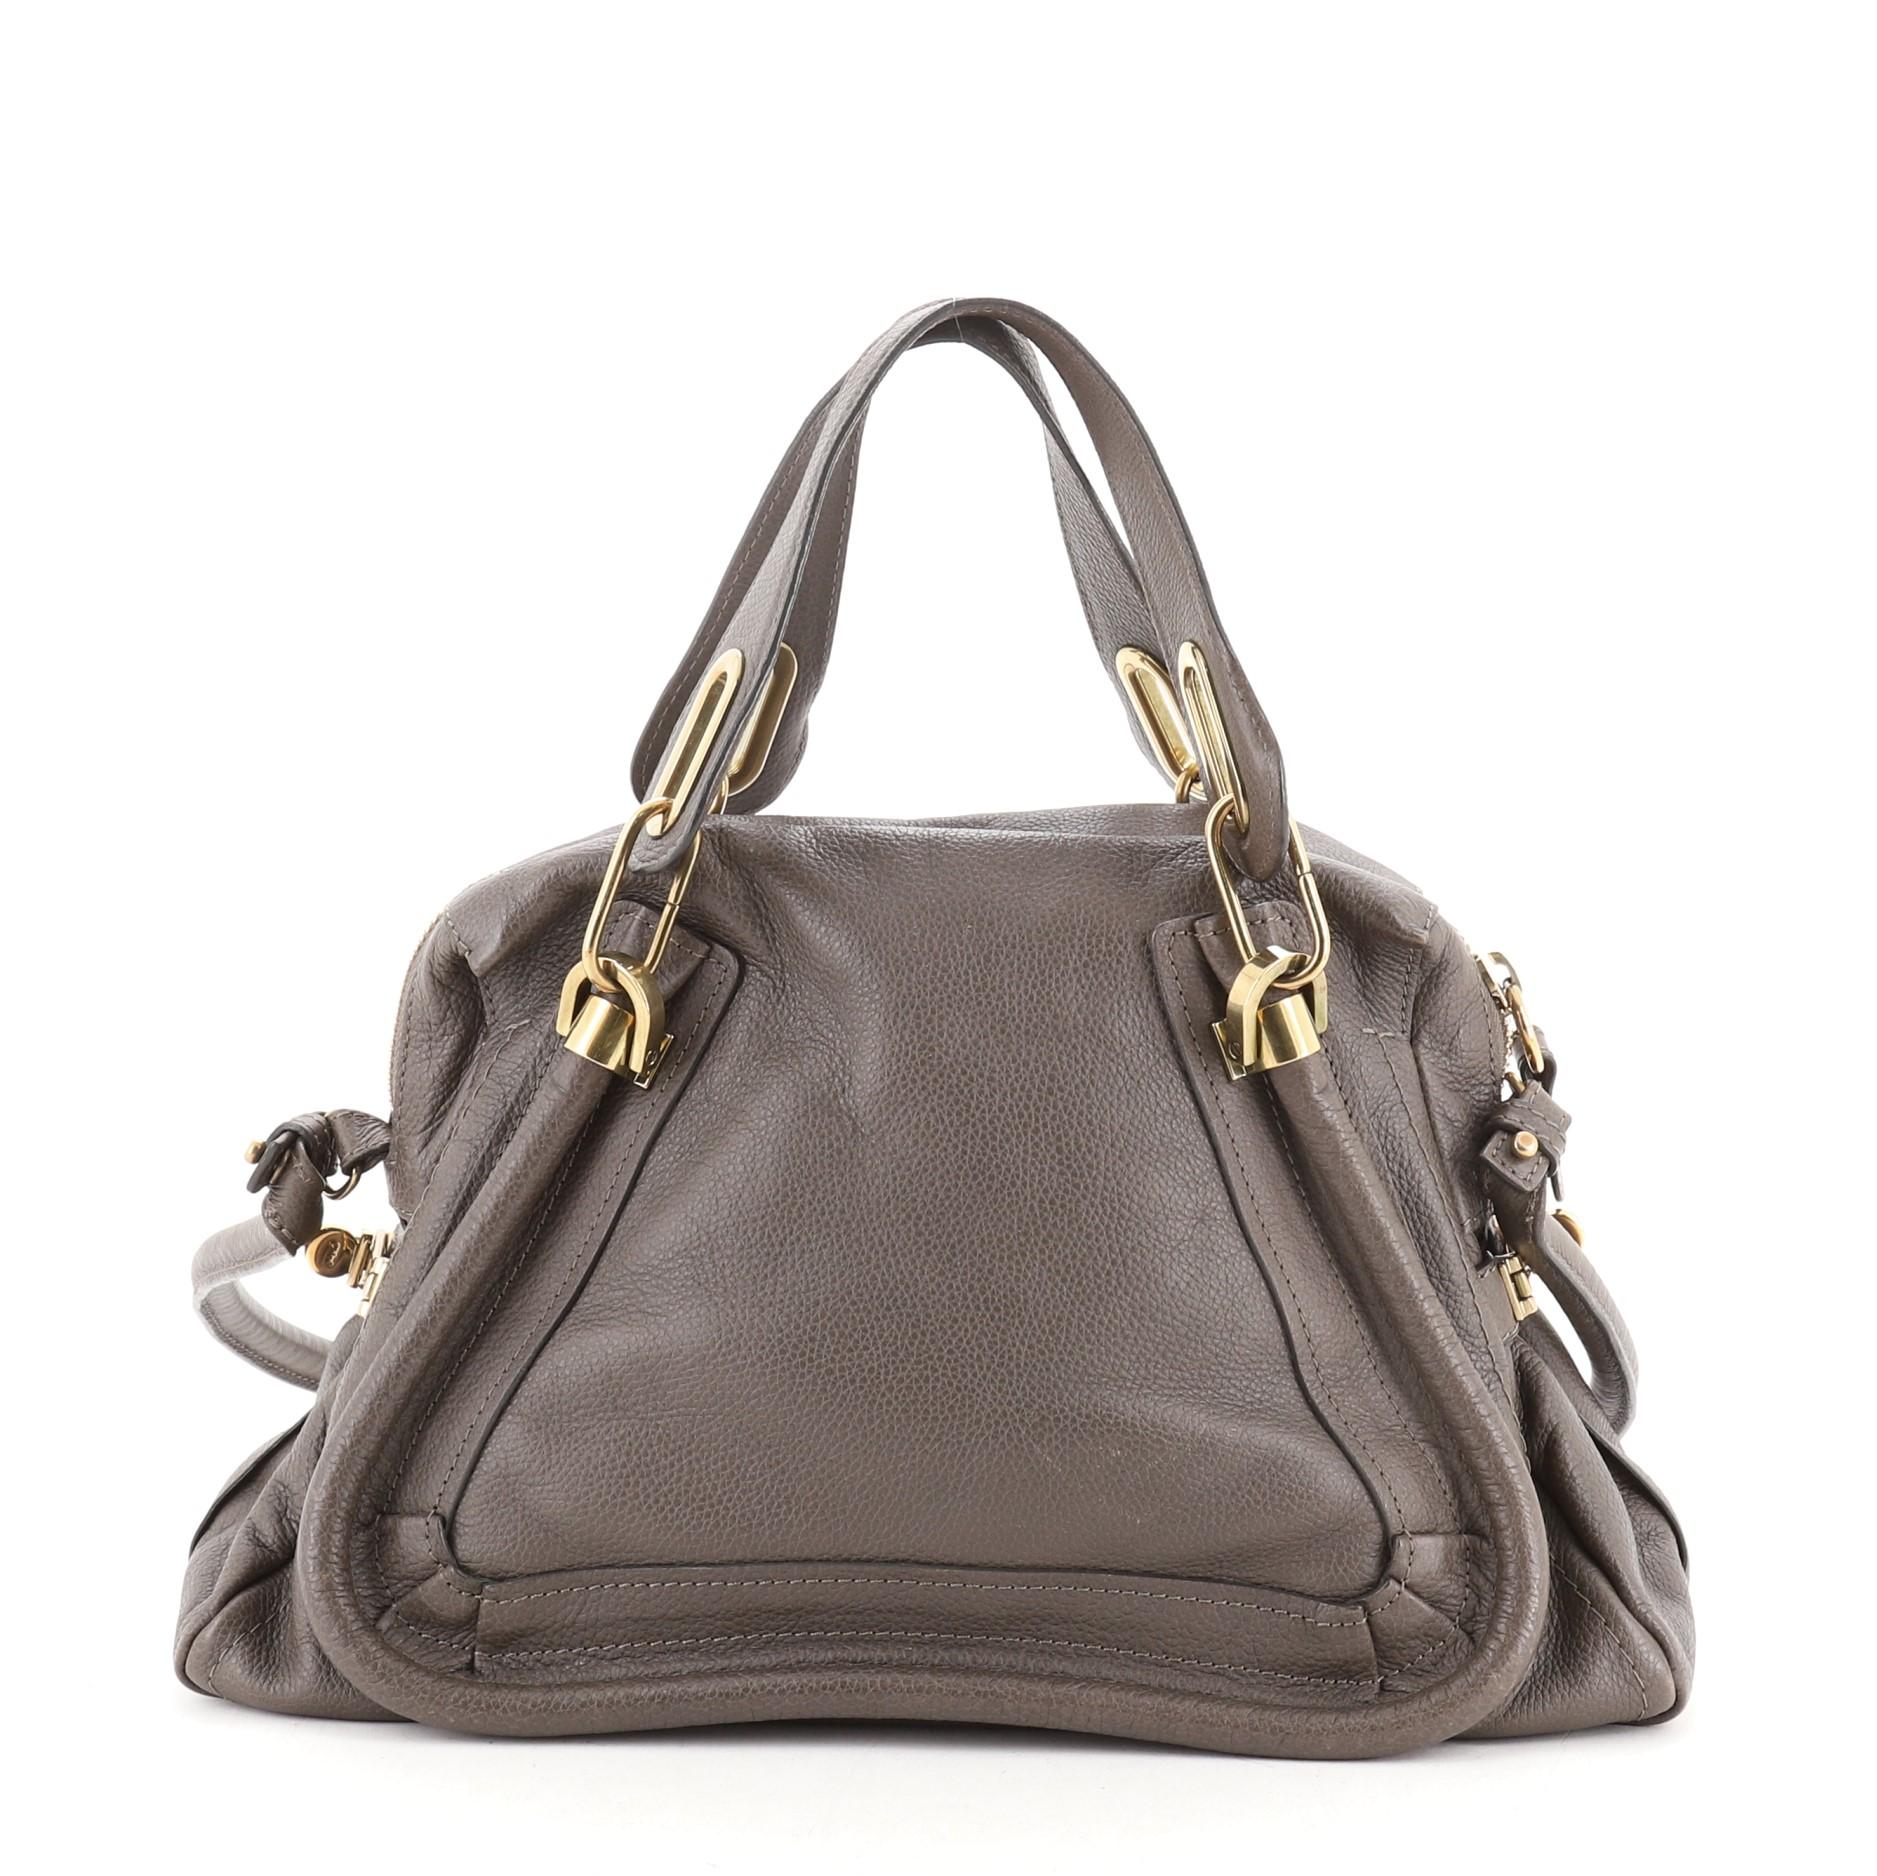 Chloe Paraty Top Handle Bag Leather Medium
Brown

Condition Details: Creasing and wear on exterior, cracking on handle and strap wax edges. Discoloration in interior, scratches on hardware.

50842MSC

Height 9